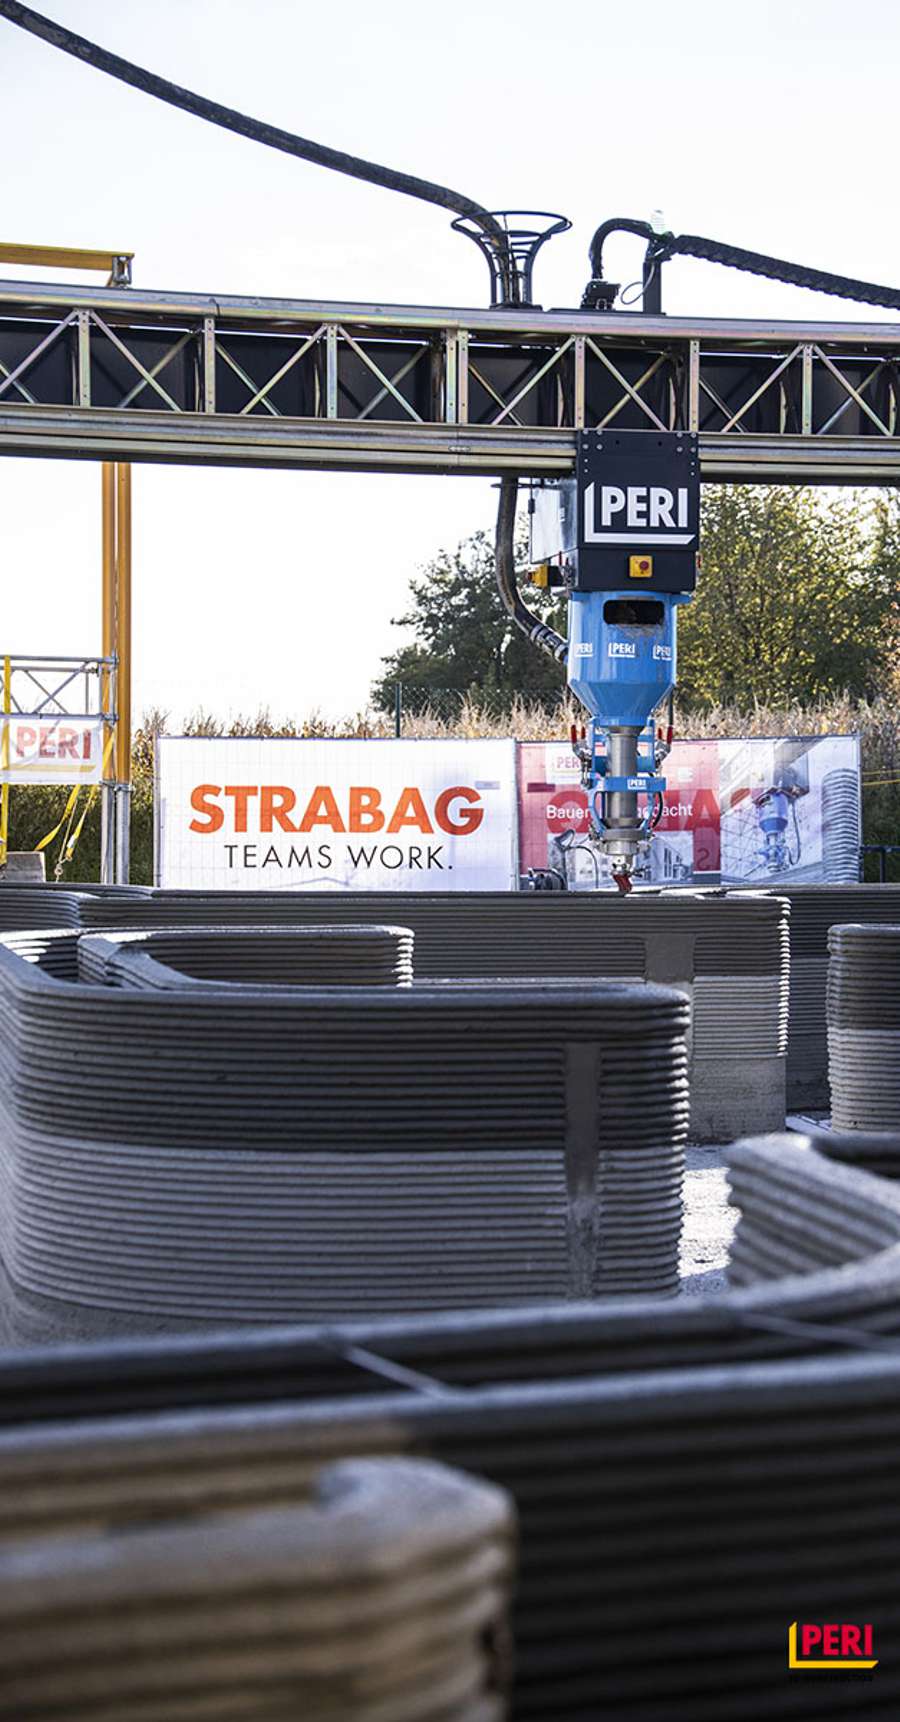 PERI and STRABAG 3D print an office building